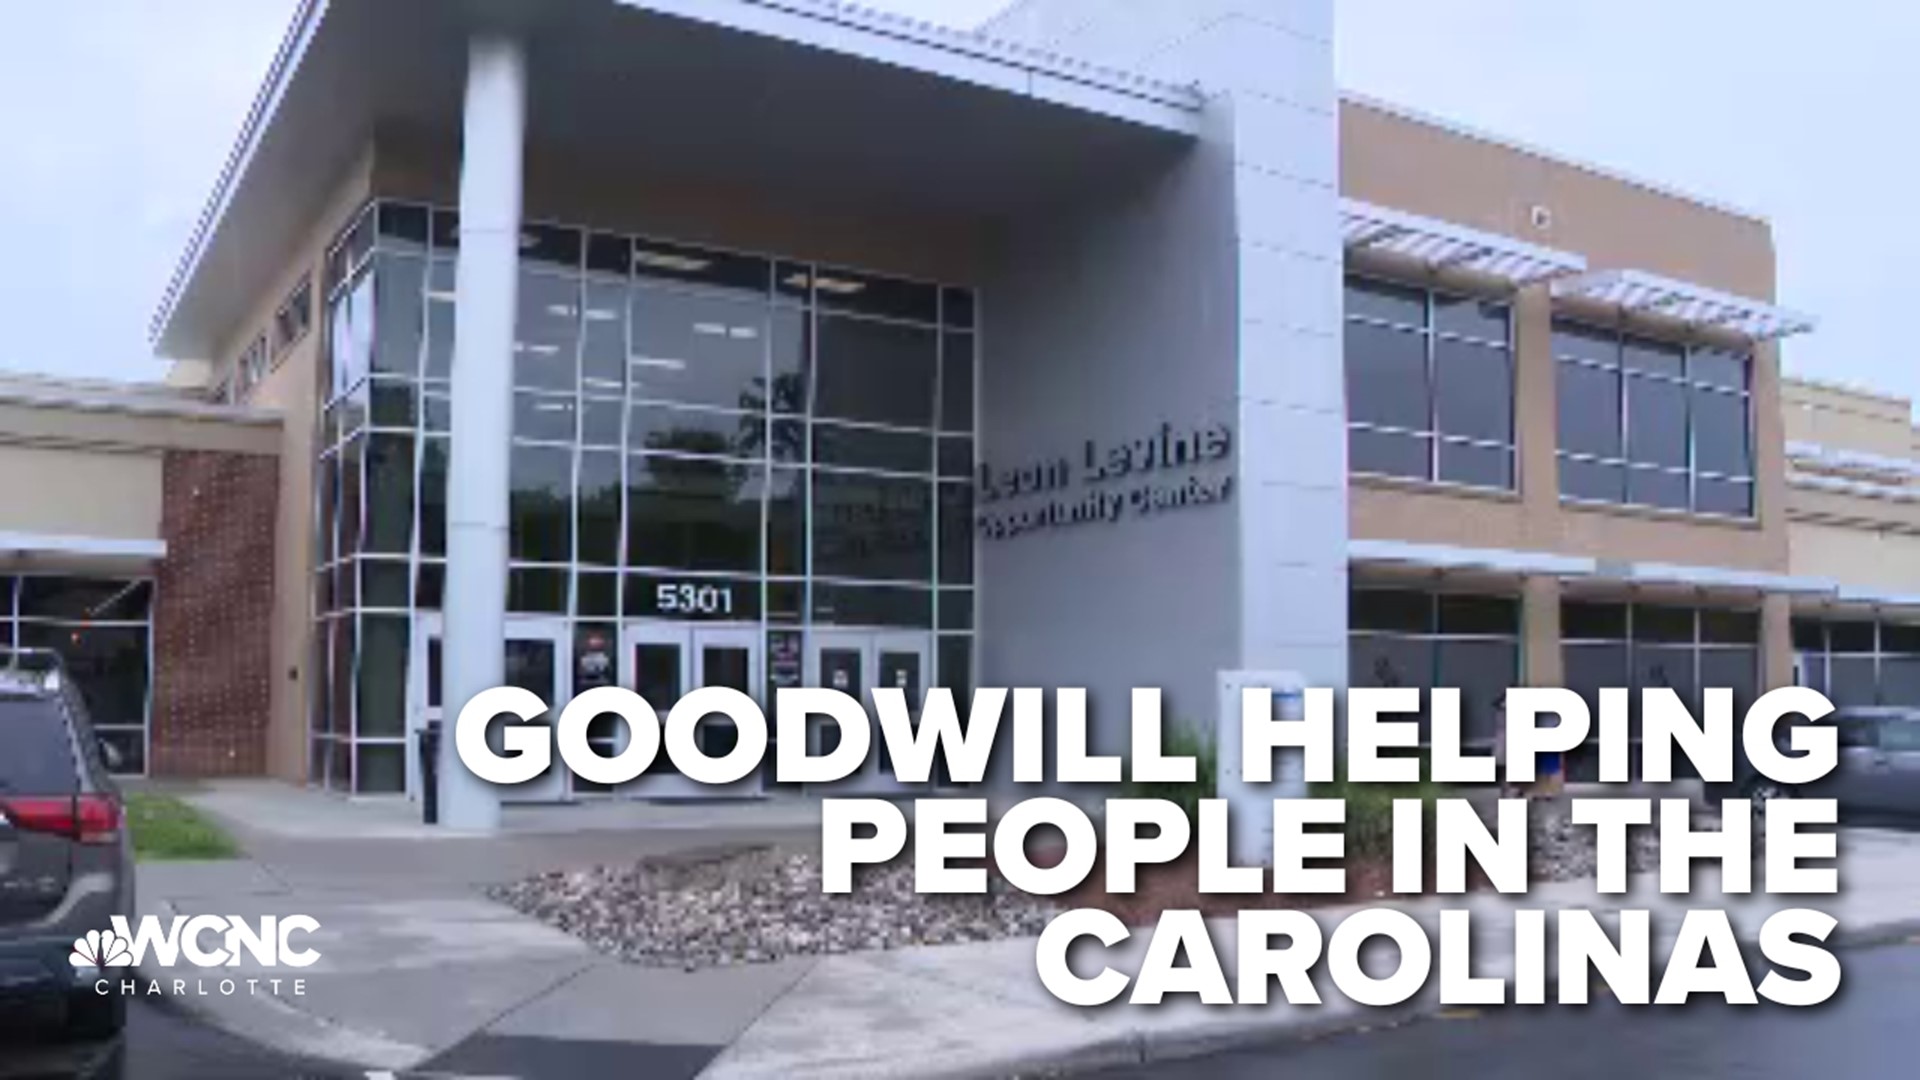 Ahead of the "Goodwill Day of Giving," WCNC's Larry Sprinkle looks at the multiple ways in which Goodwill provides assistance for people in the Carolinas.